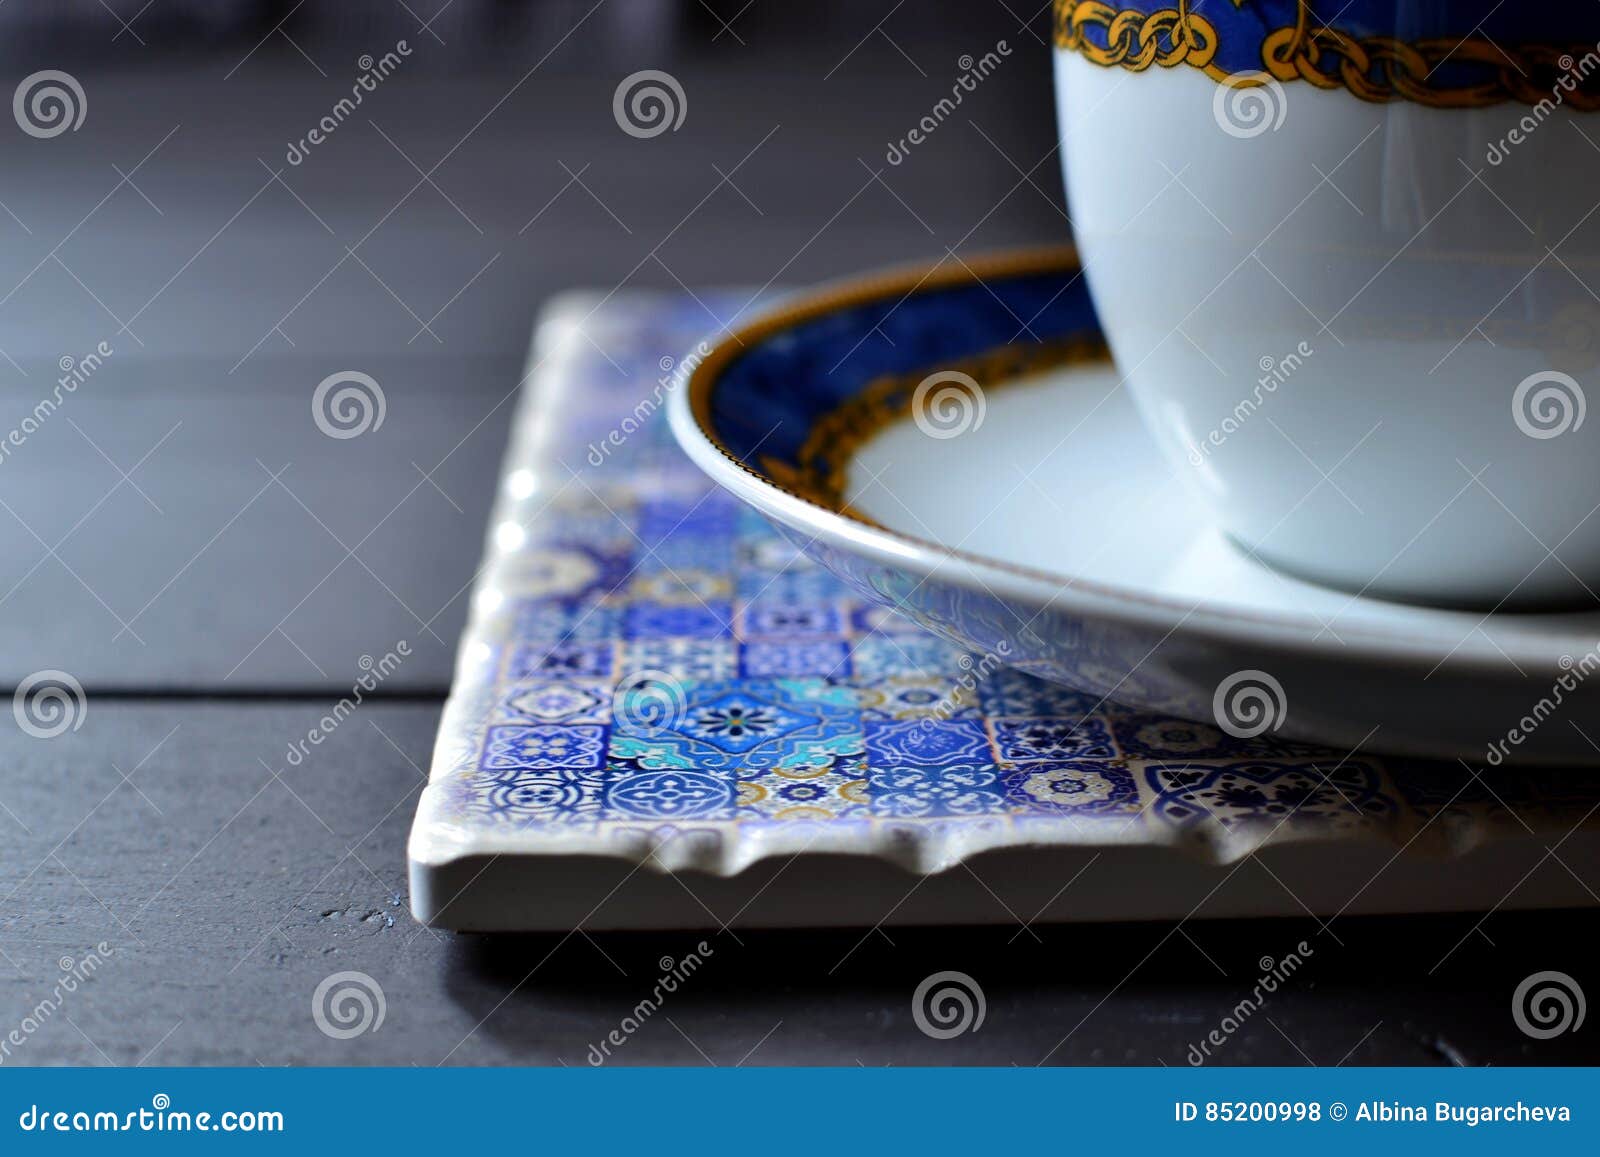 Tea cup and saucer on a placemat. Fine china white tea cup and saucer on a blue colored ornamented ceramic placemat